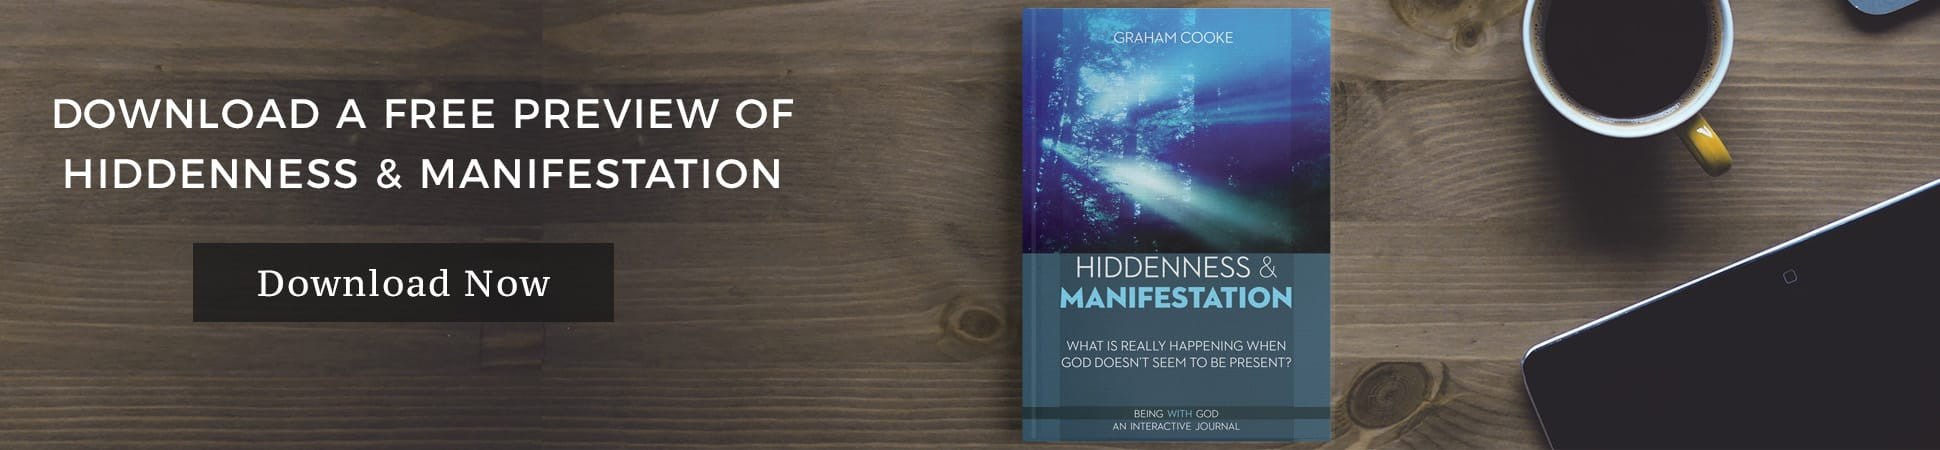 Hiddenness & Manifestation FREE preview